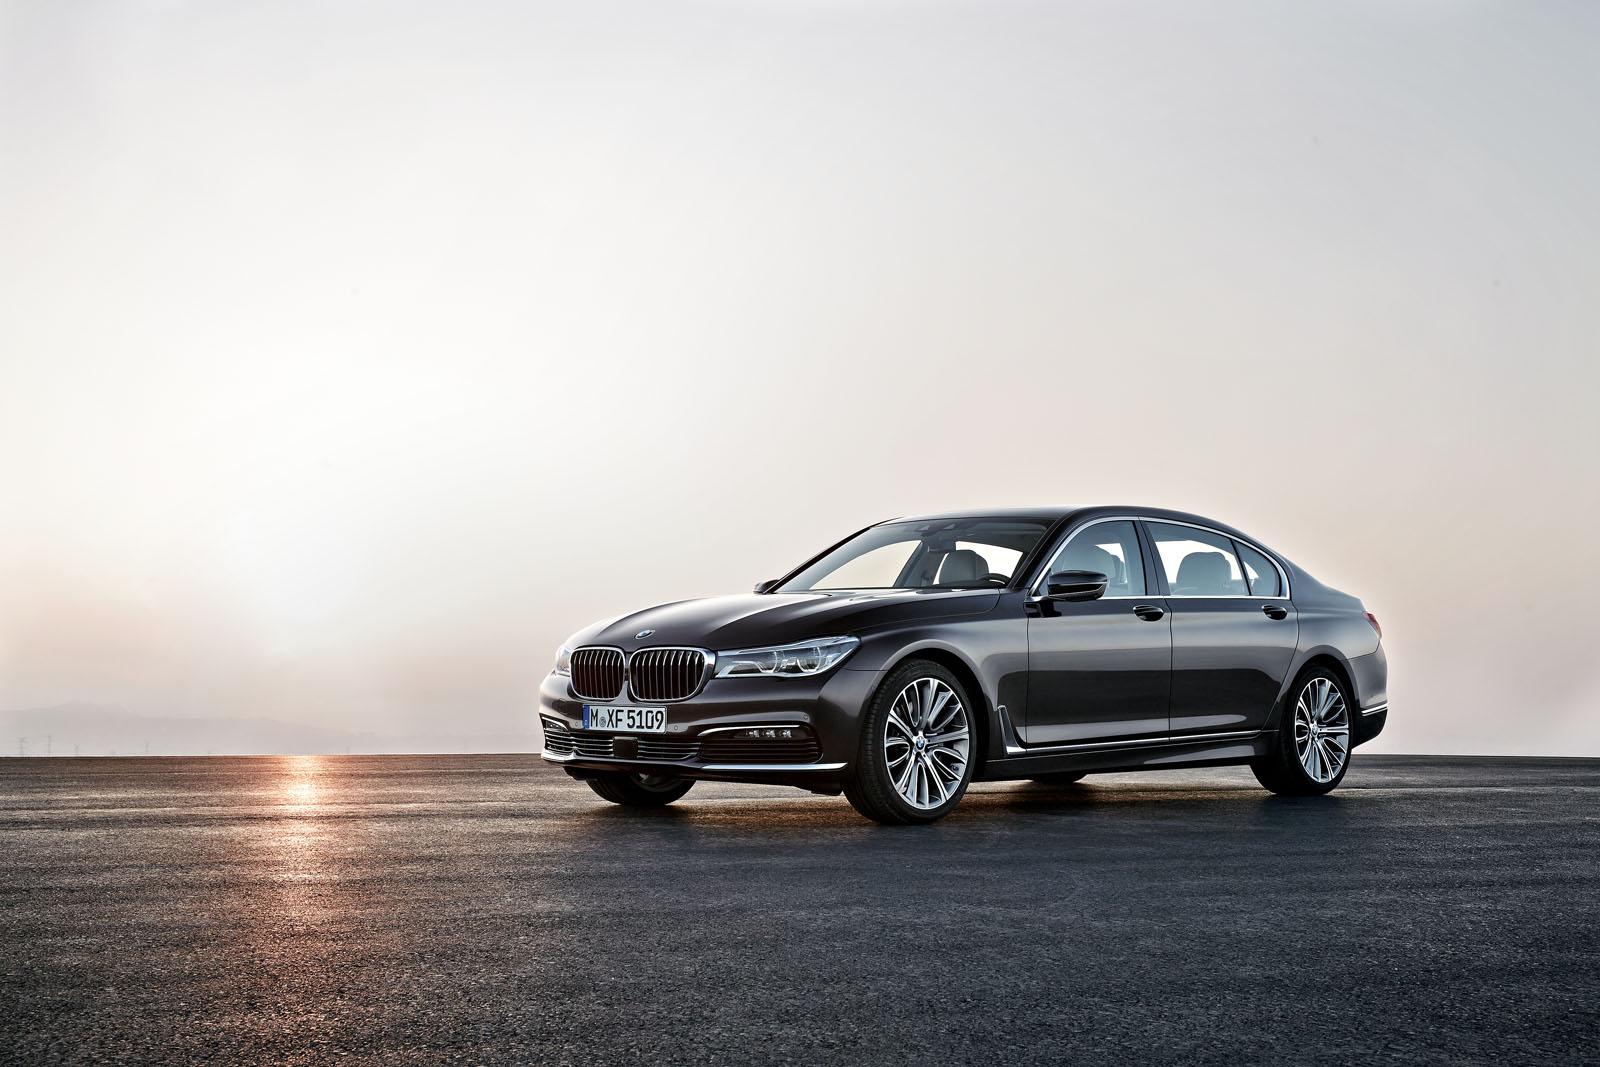 2016 BMW 7-Series and BMW 330e Nominated Amongst the World Car of the Year Finalists